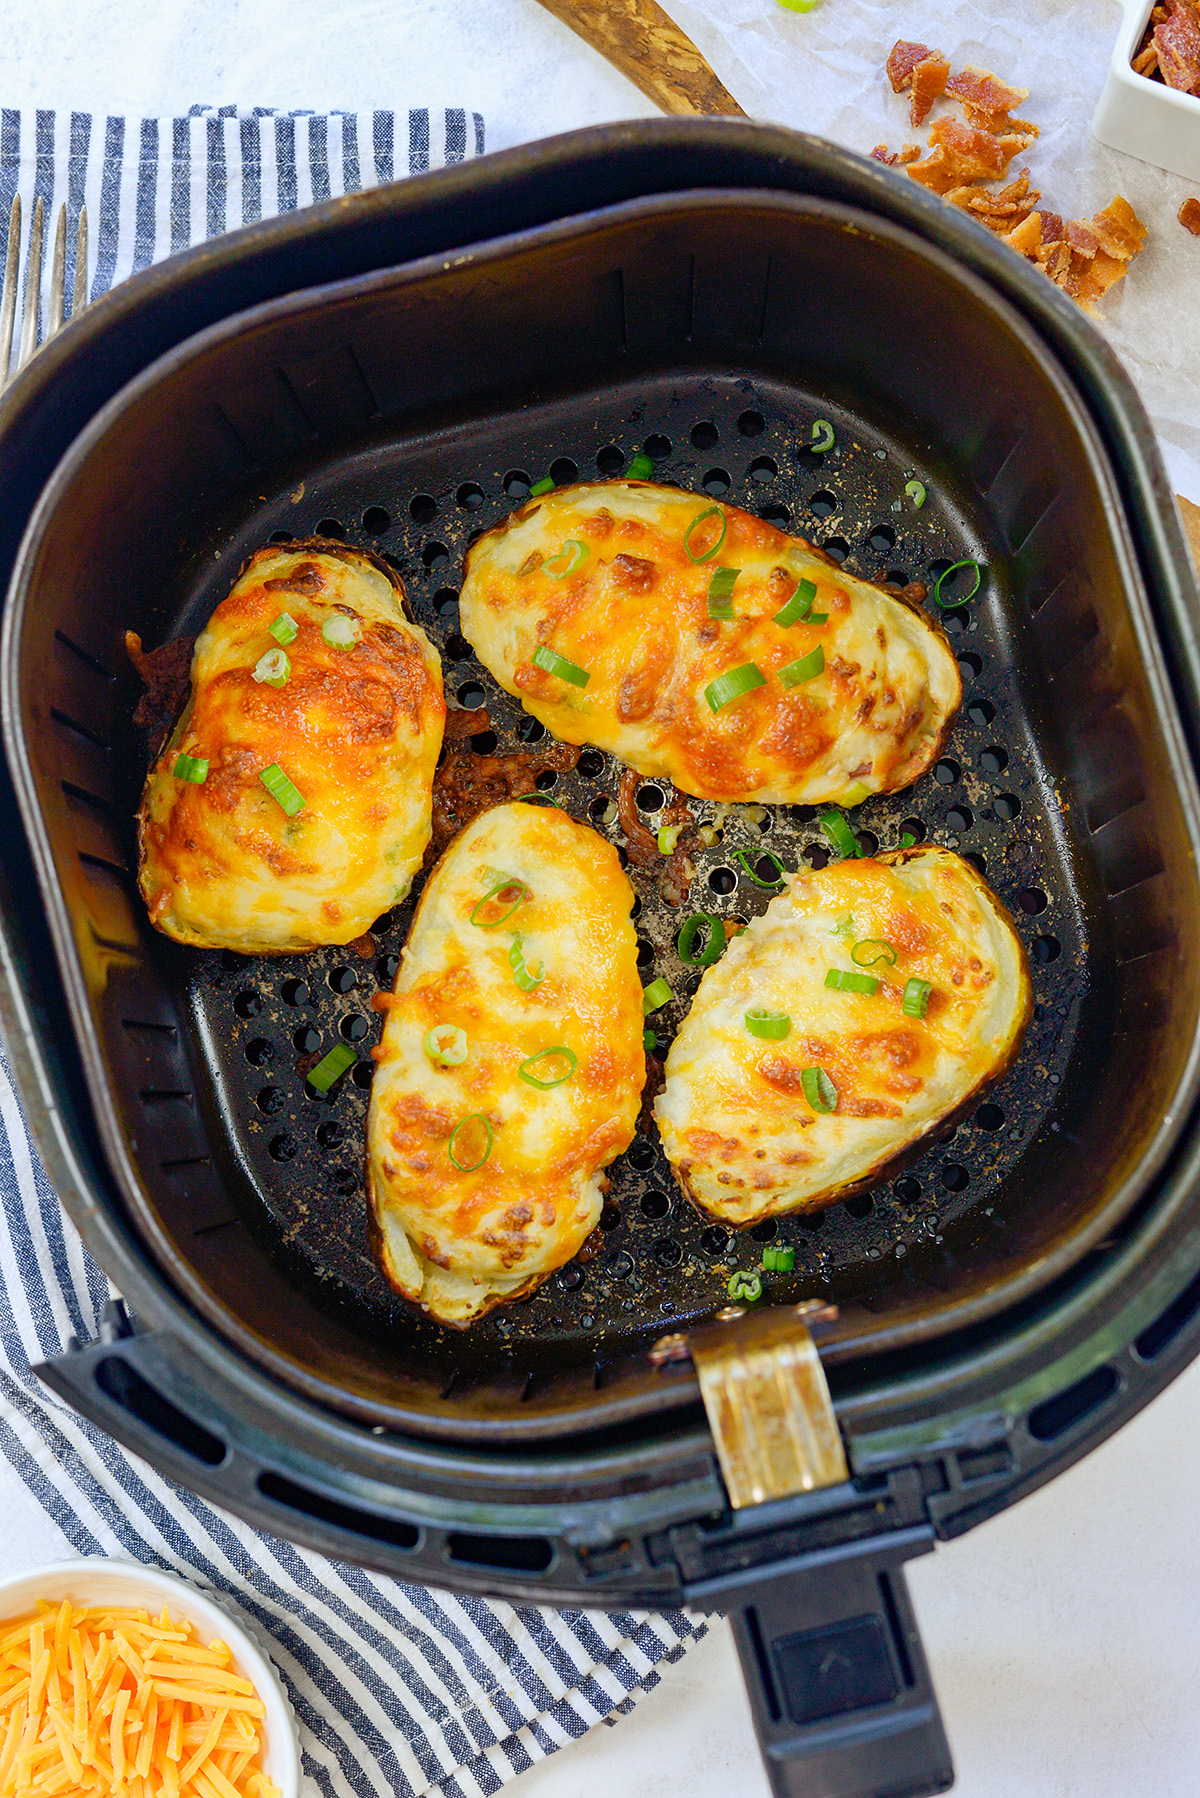 Four twice baked potatoes in an air fryer basket.